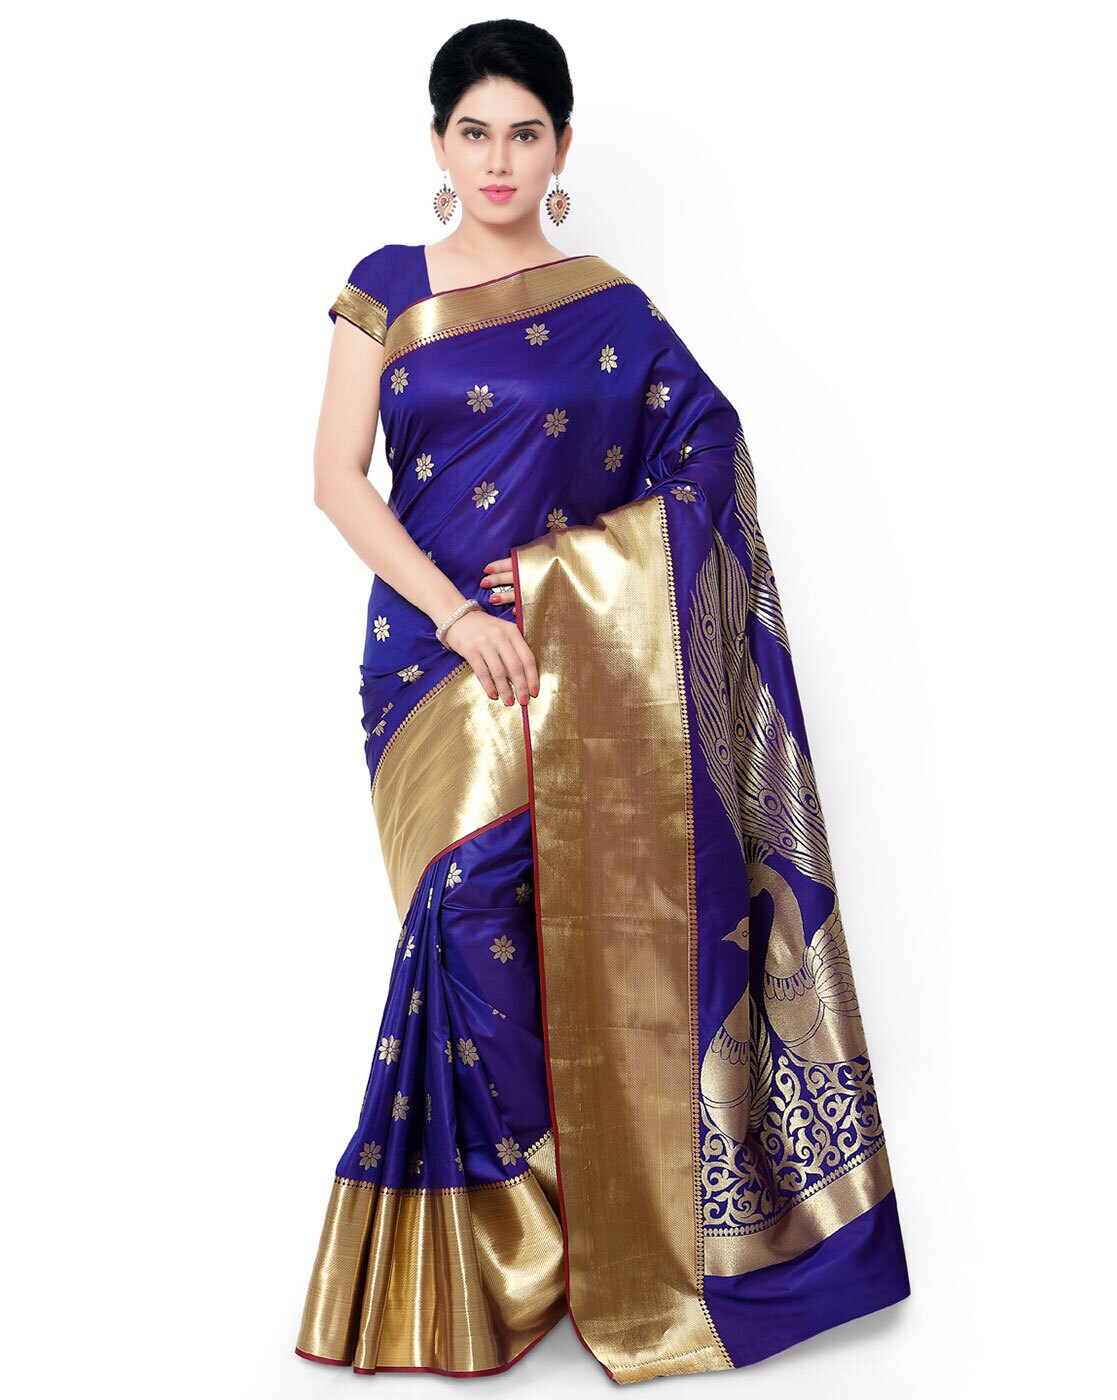 Buy Online Indian Blue Saree for Bollywood theme Party wear with Stitched  Gold Raw silk BLOUSE shops Southall London 7270